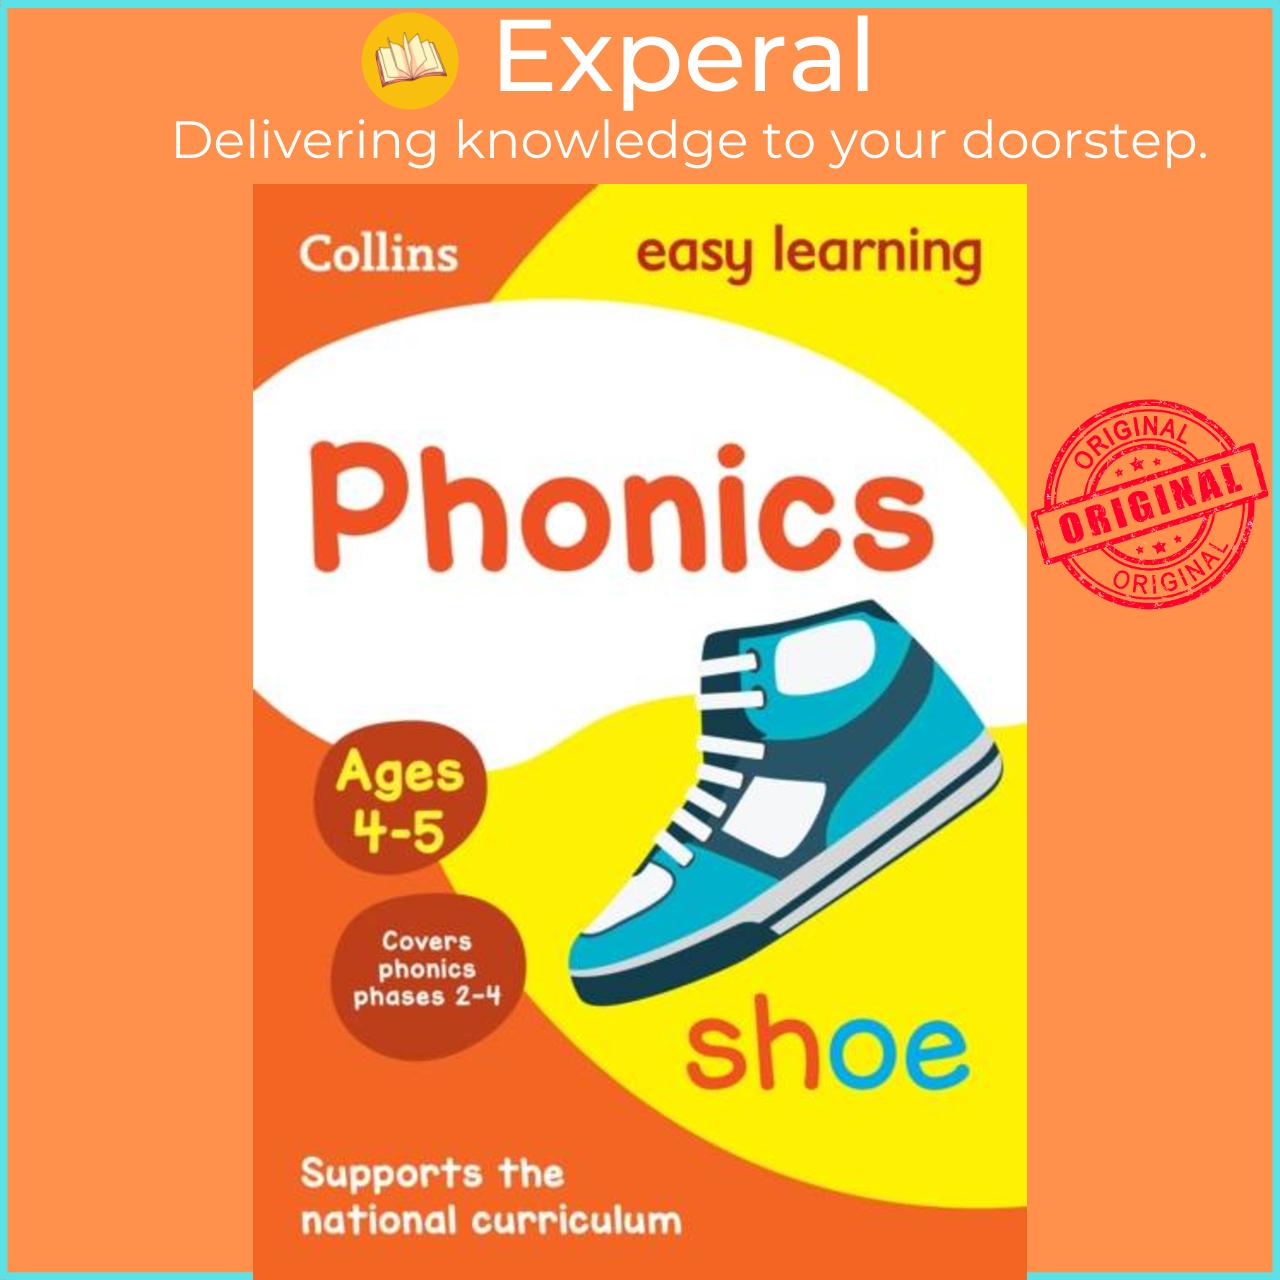 Sách - Phonics Ages 4-5 - Ideal for Home Learning by Collins Easy Learning (UK edition, paperback)